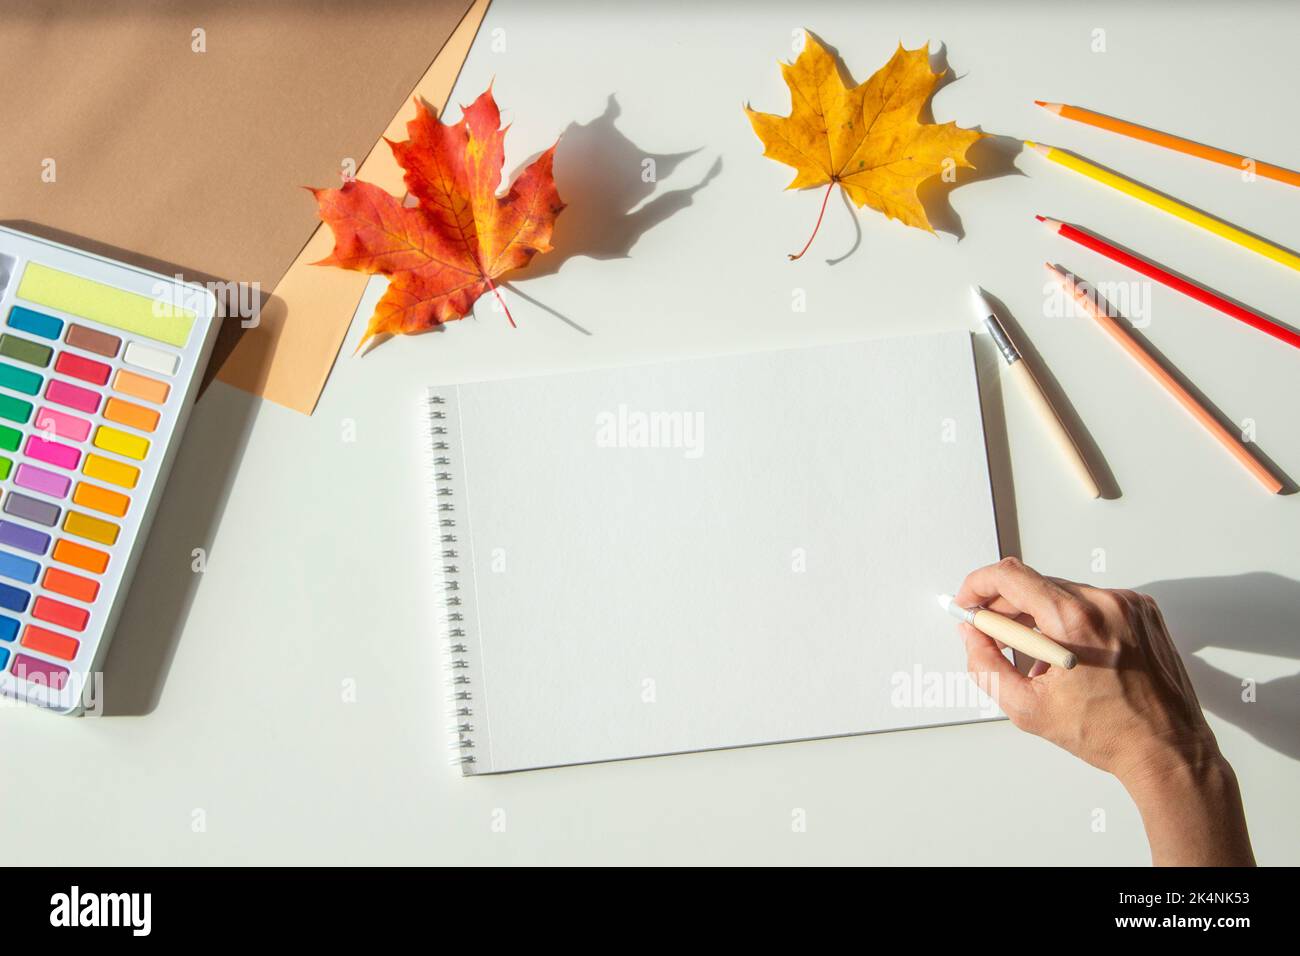 https://c8.alamy.com/comp/2K4NK53/autumn-composition-woman-hand-holding-brush-over-blank-sketchbook-page-and-begin-painting-watercolor-paint-colored-pencils-and-autumn-maple-fall-2K4NK53.jpg